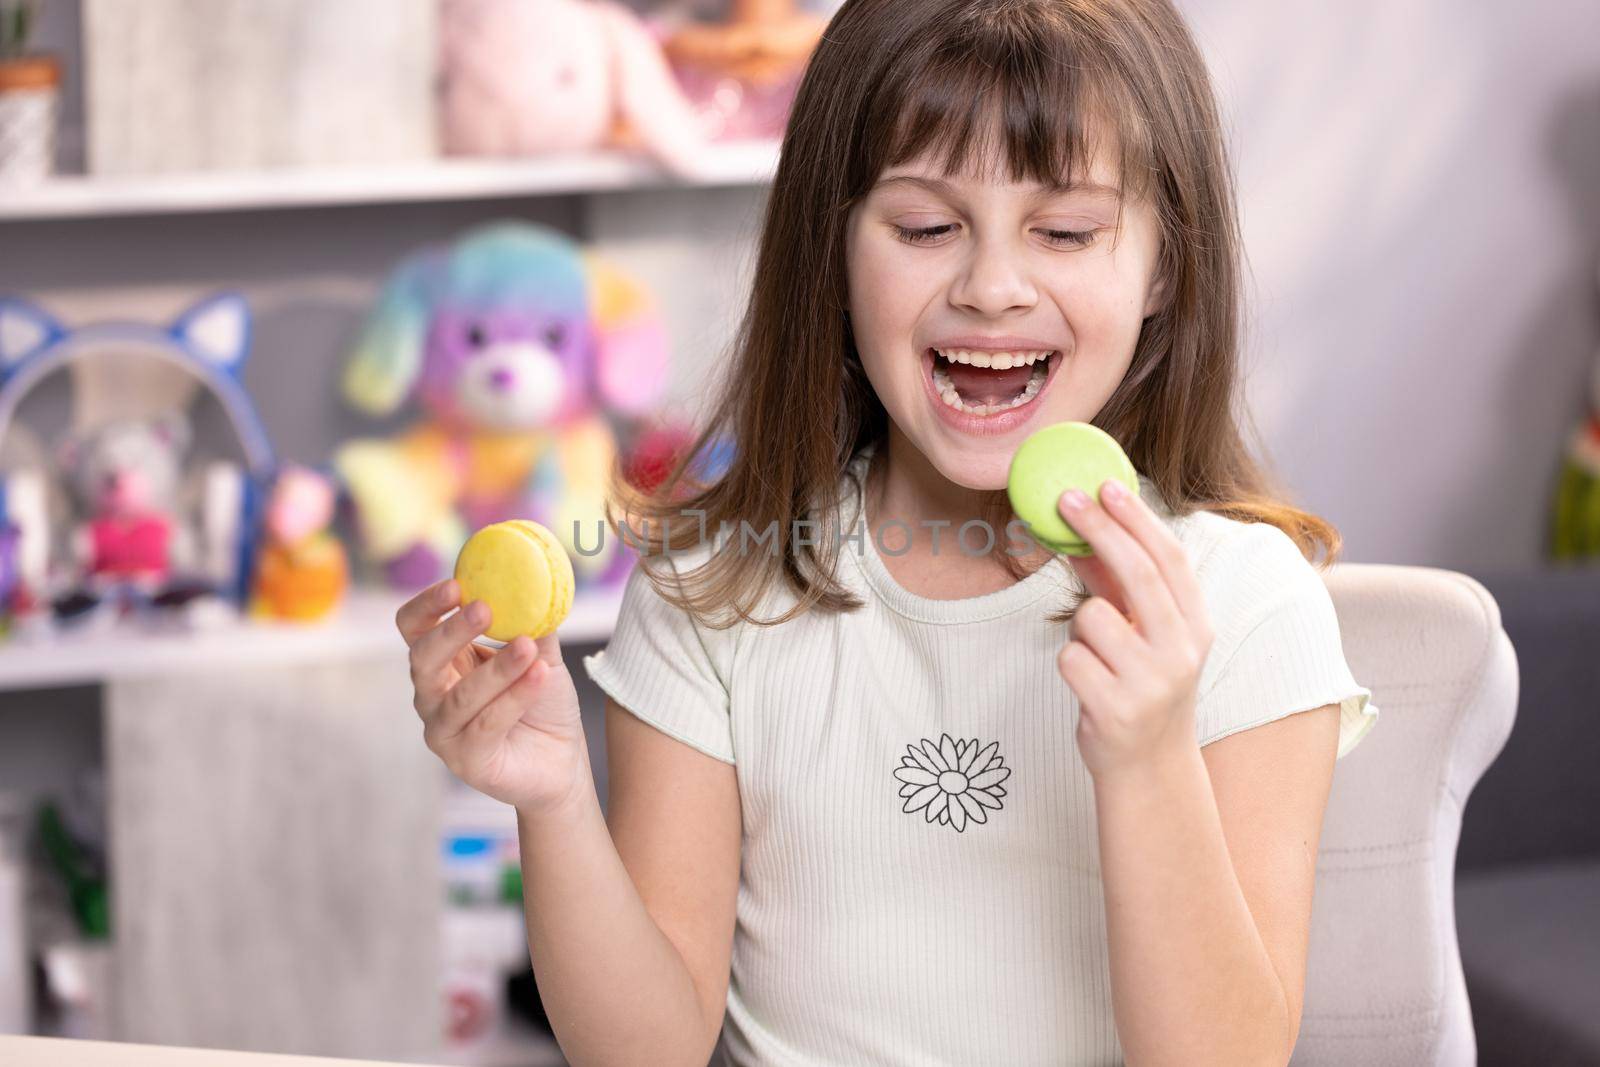 Teen girl plays with dessert macarons, holding the cookies like glasses around the eyes. Happy smiling face of a little girl covering her eyes with macaroons on a colored home background. Being happy by uflypro